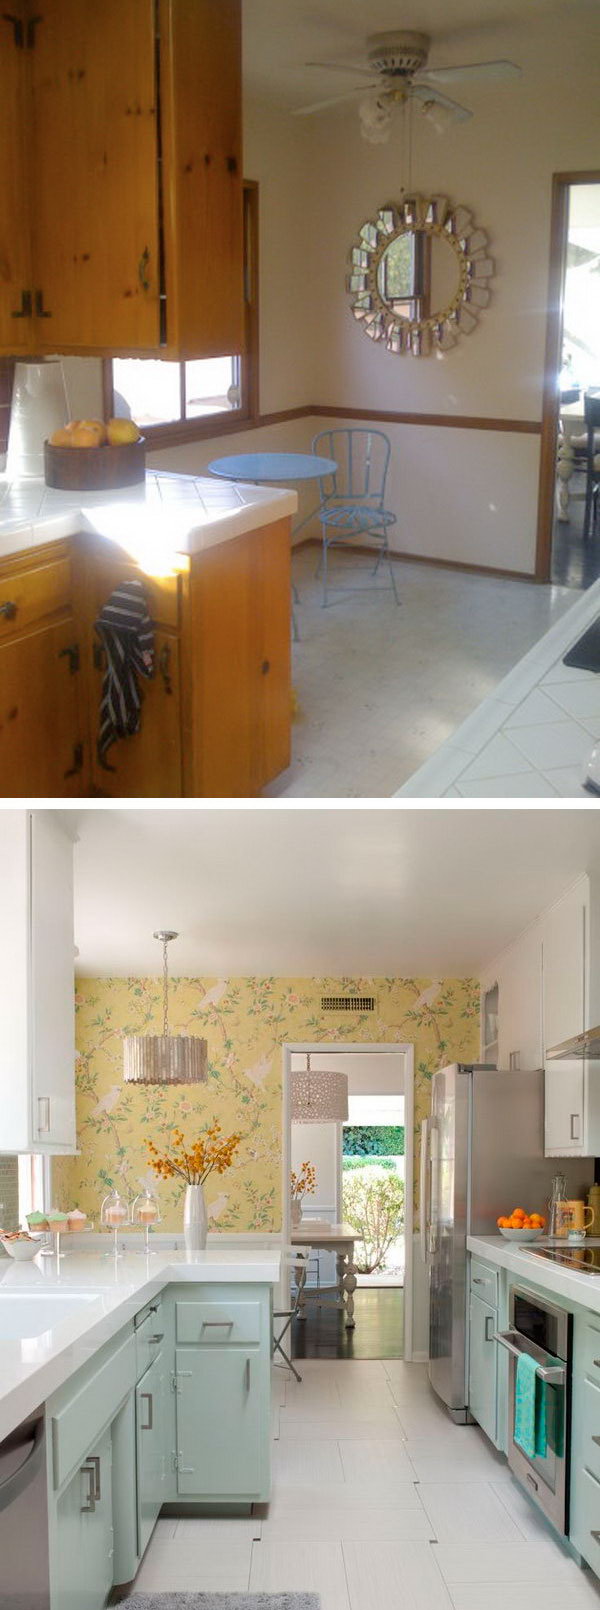 Before & After: A 1950s Kitchen Gets An Affordable Upgrade. Unbelievable renovation with a limited budget and time frame, a major overhaul can be done on a dated kitchen. 